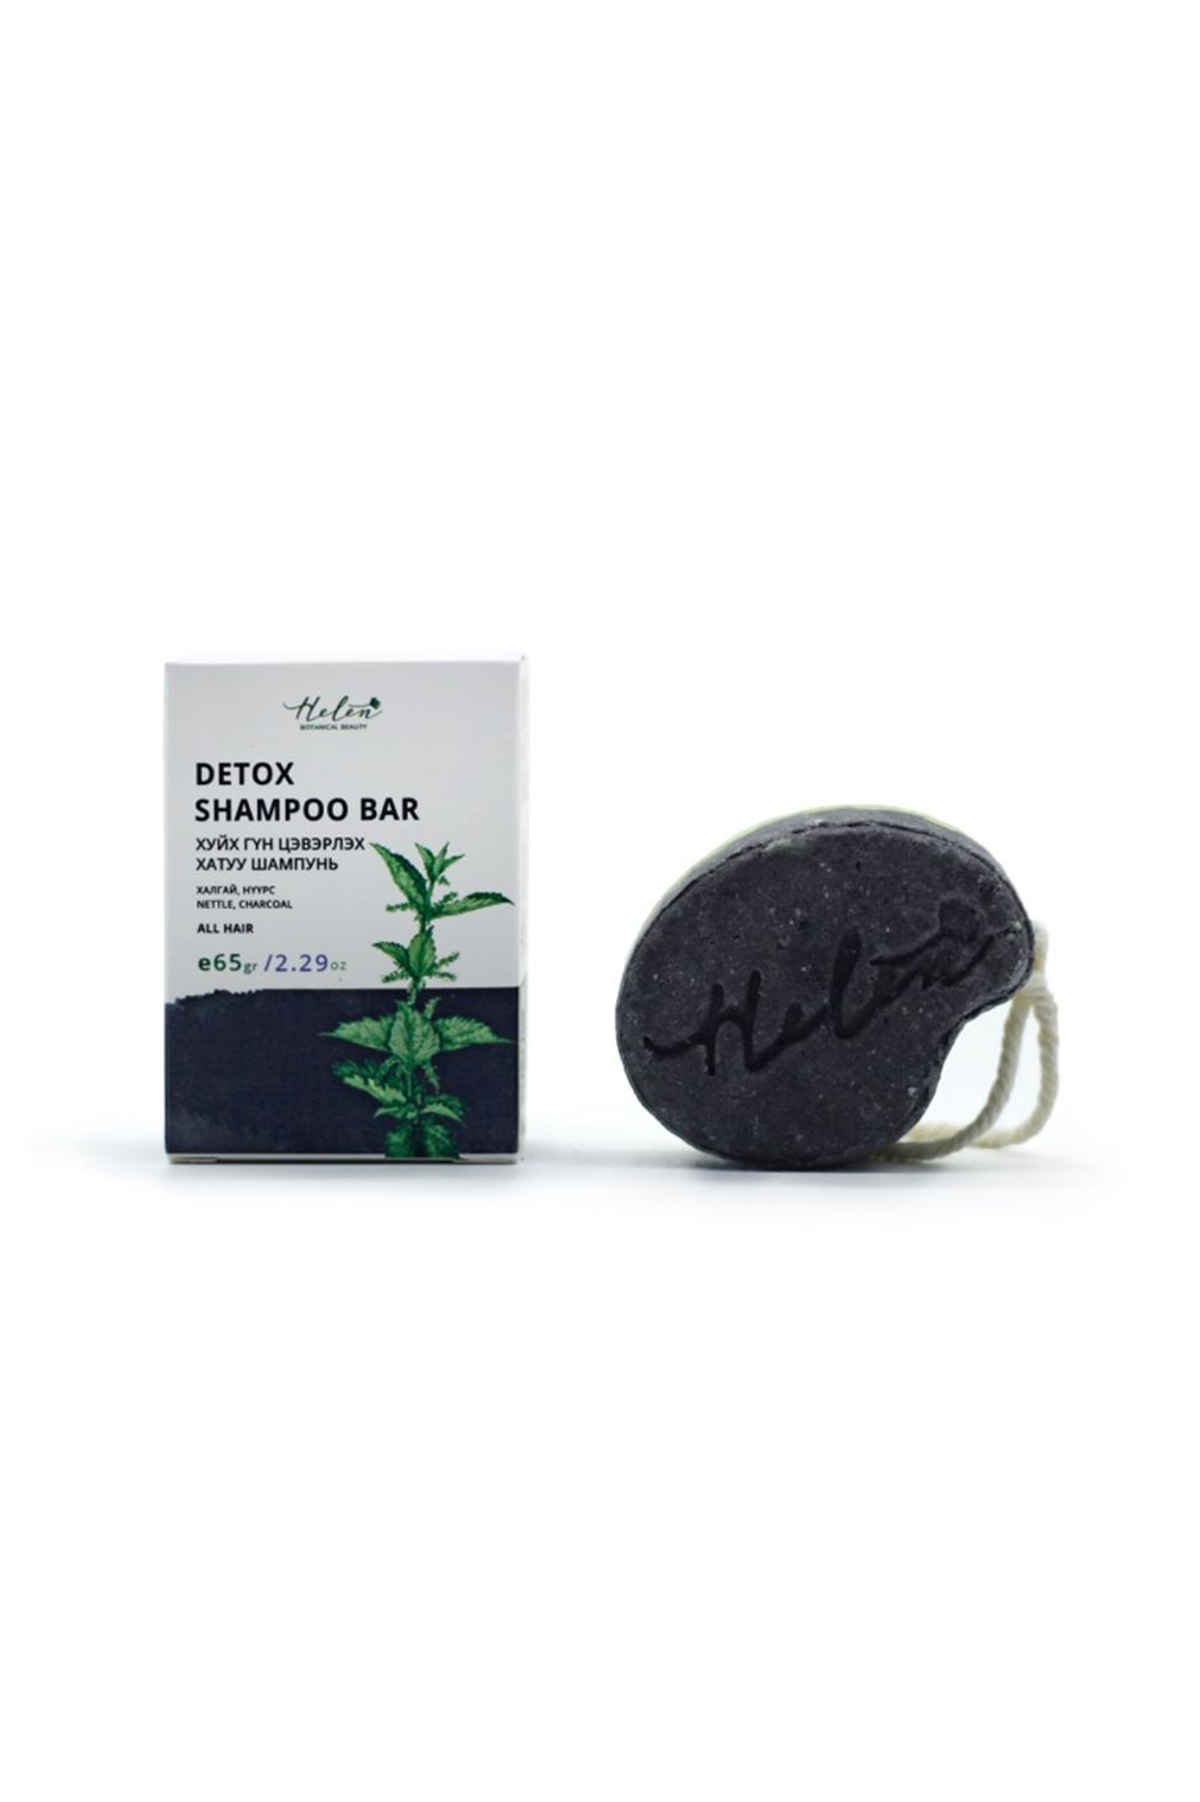 Handmade detox shampoo bar made with organic ingredients. It is meant to use for deep cleansing of the scalp. Made with nettle 